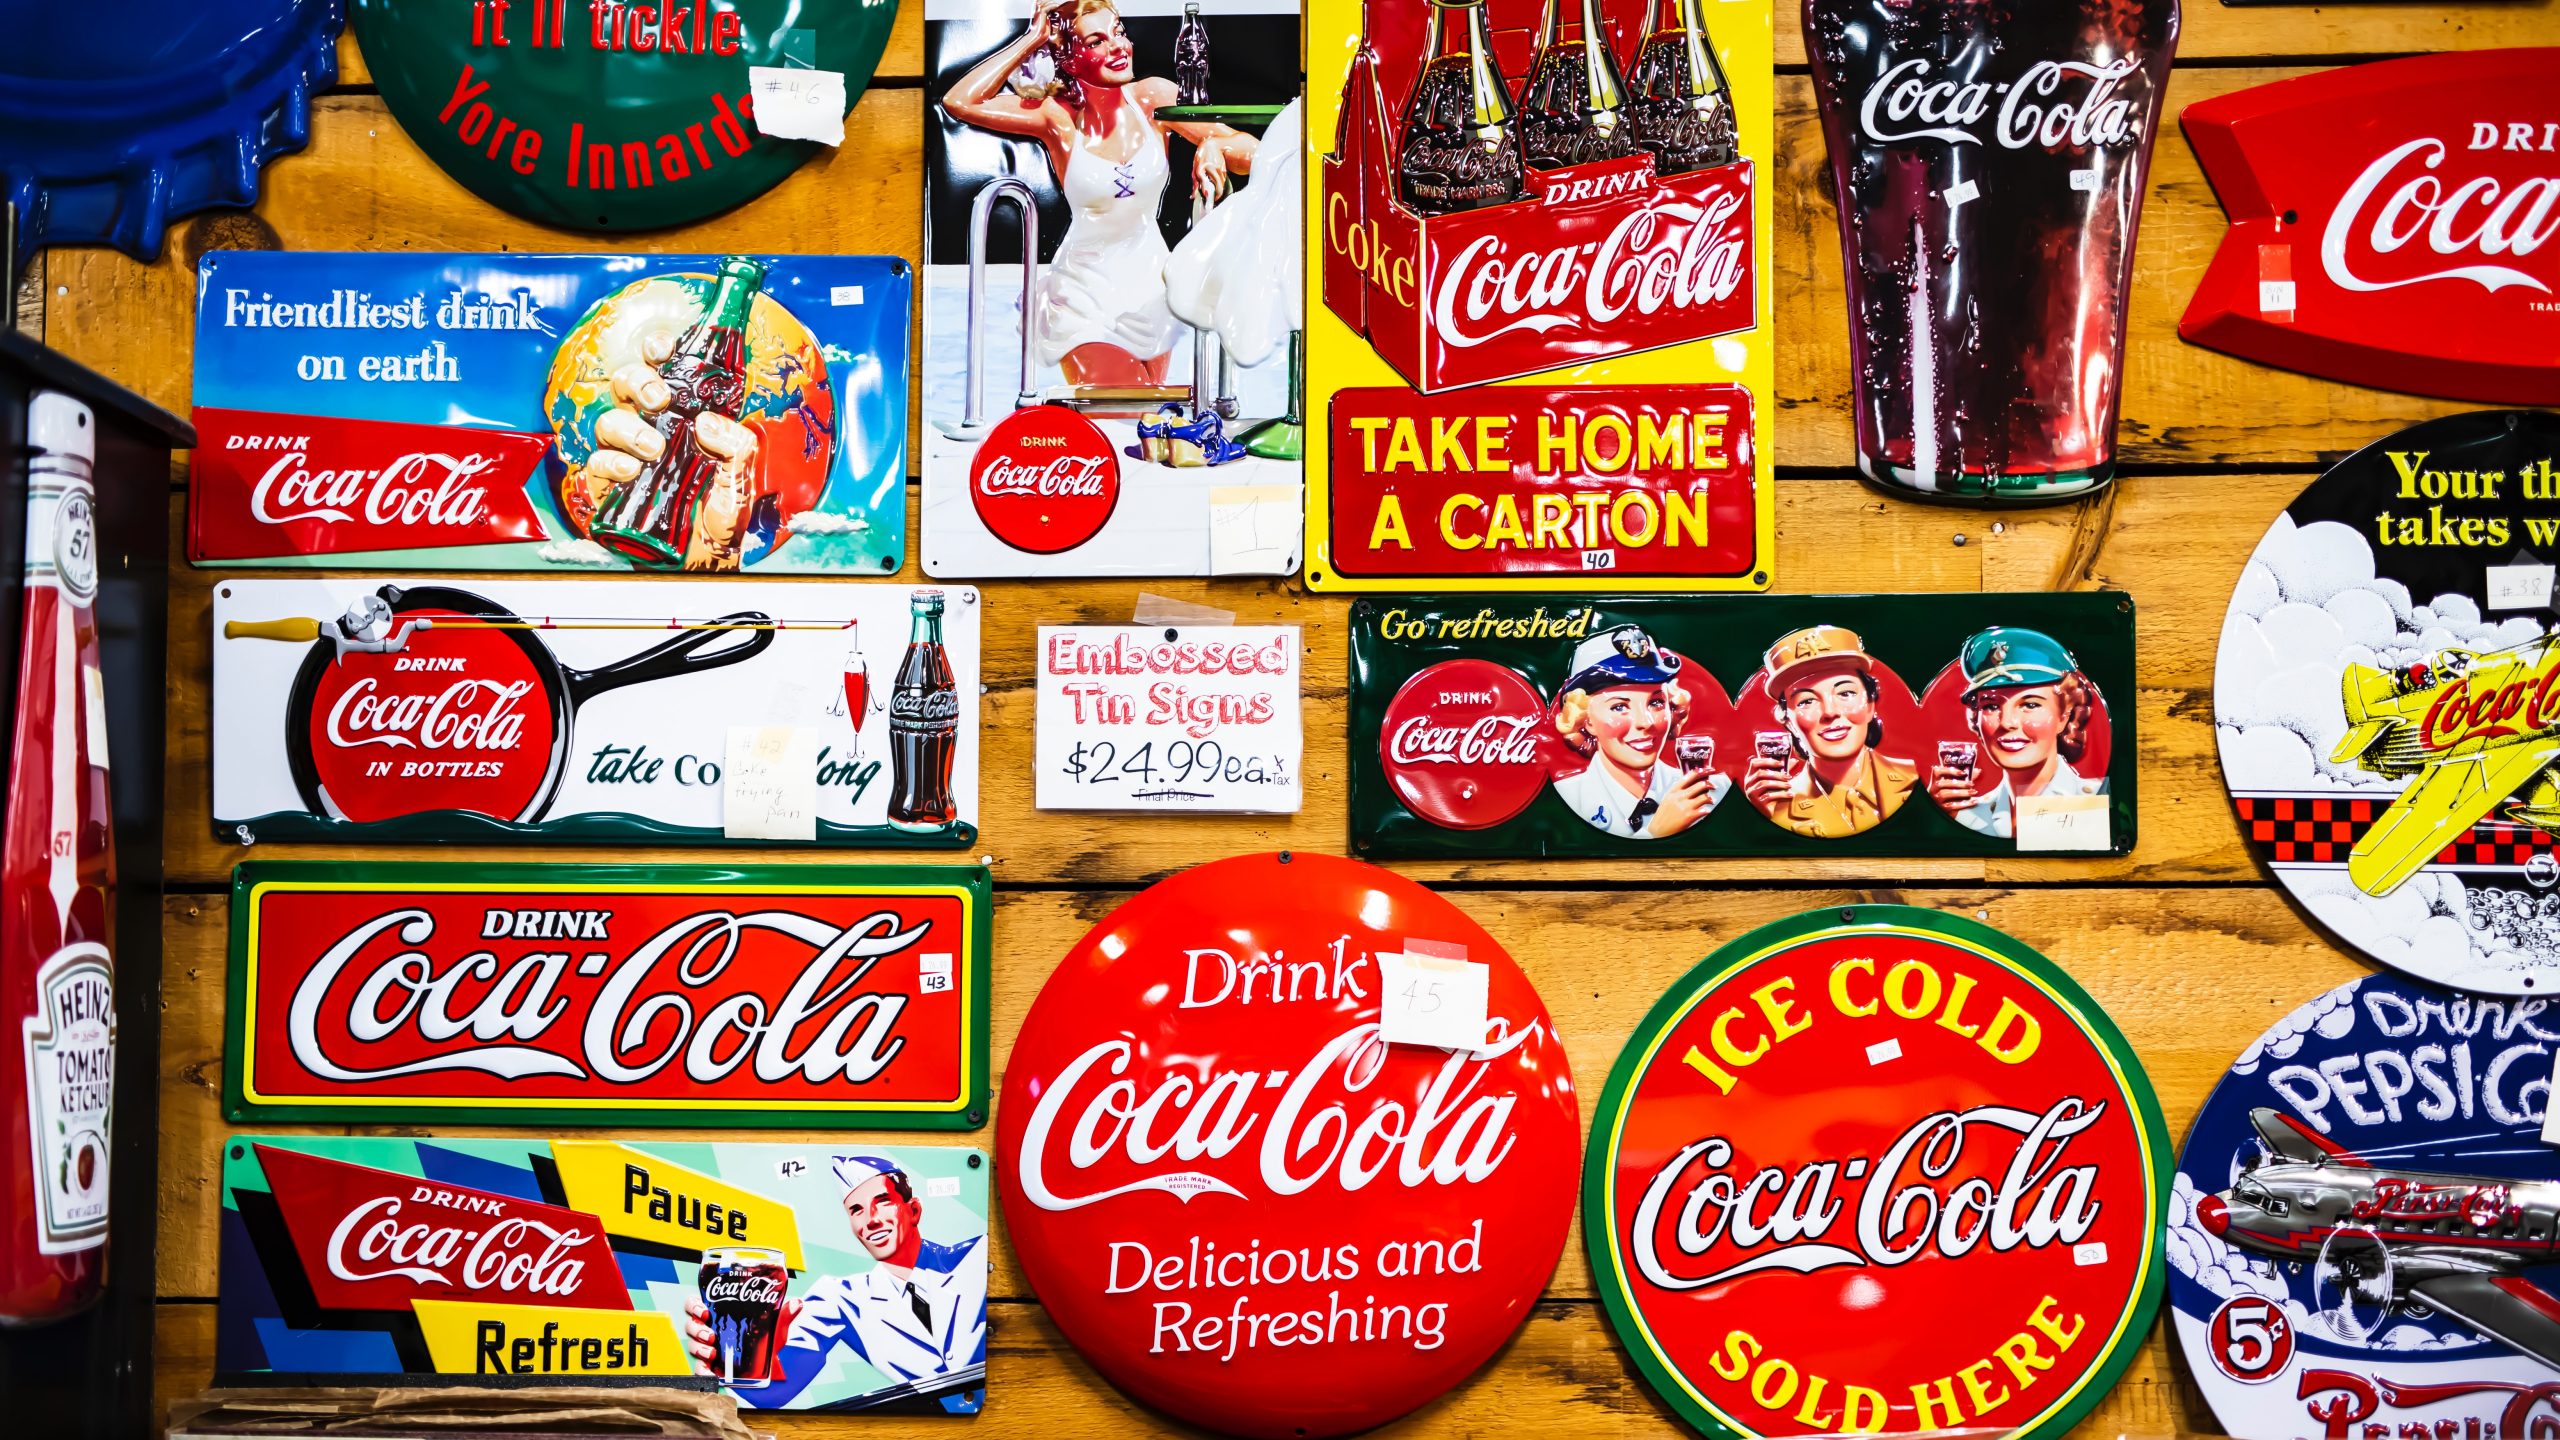 Collage featuring vintage Coca-Cola logos on various products and memorabilia.